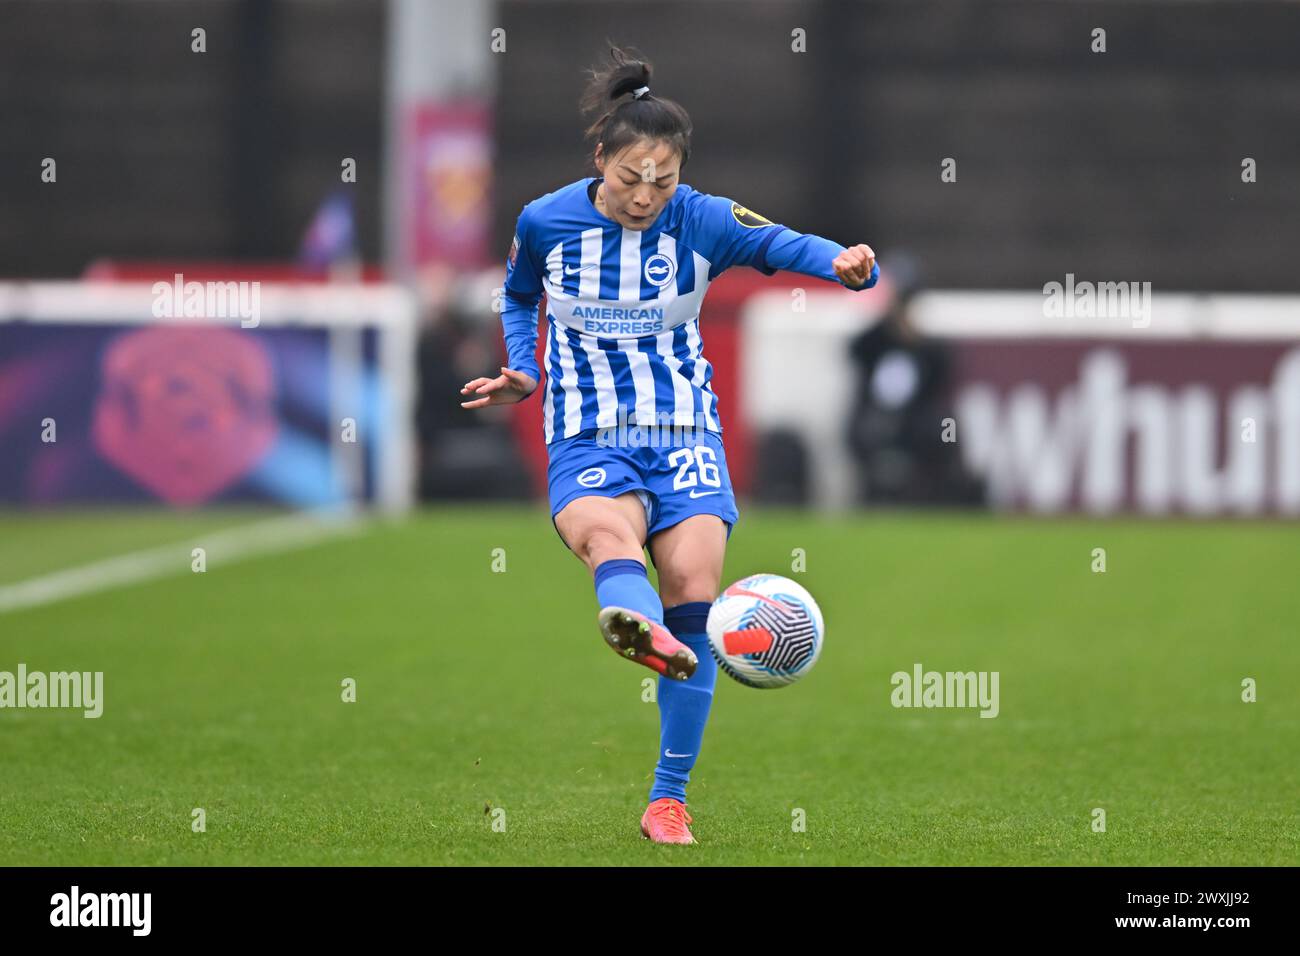 Dagenham, Kent, UK. Sunday 31st March 2024.Mengwen Li (26 Brighton) Passes the ball during the Barclays FA Women's Super League match between West Ham United and Brighton and Hove Albion at the Chigwell Construction Stadium, Dagenham on Sunday 31st March 2024. (Photo: Kevin Hodgson | MI News) Credit: MI News & Sport /Alamy Live News Stock Photo